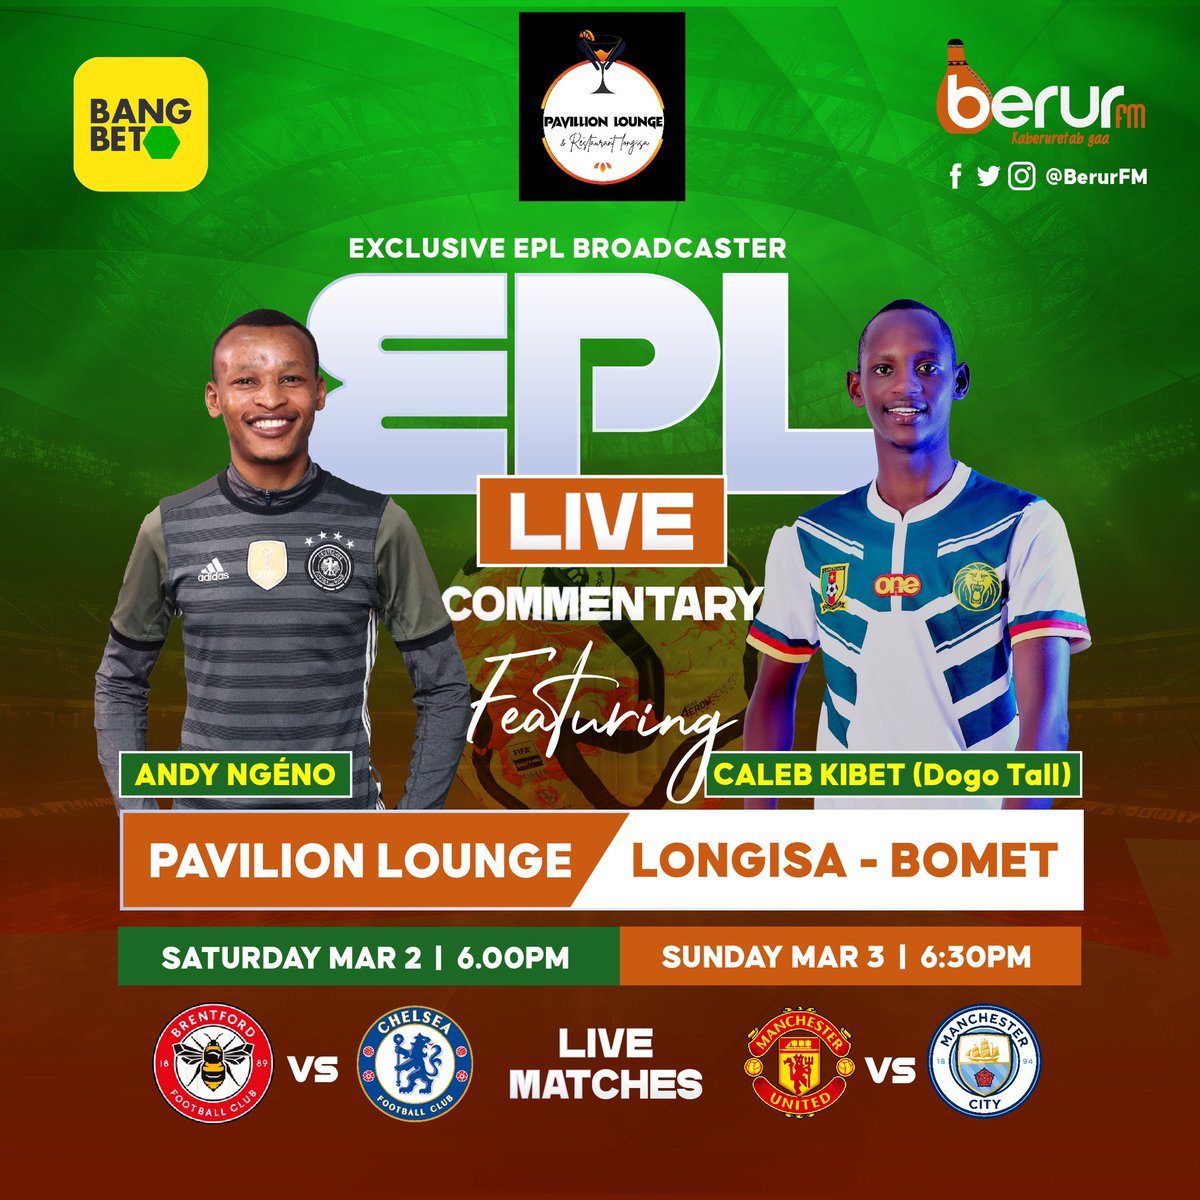 Pikab Bomet ongetuyenchi Longisa en Pavilion Lounge. After the match there'll be live performances by Vicky Brilliance & Light star man of Style. #HomeofEPL